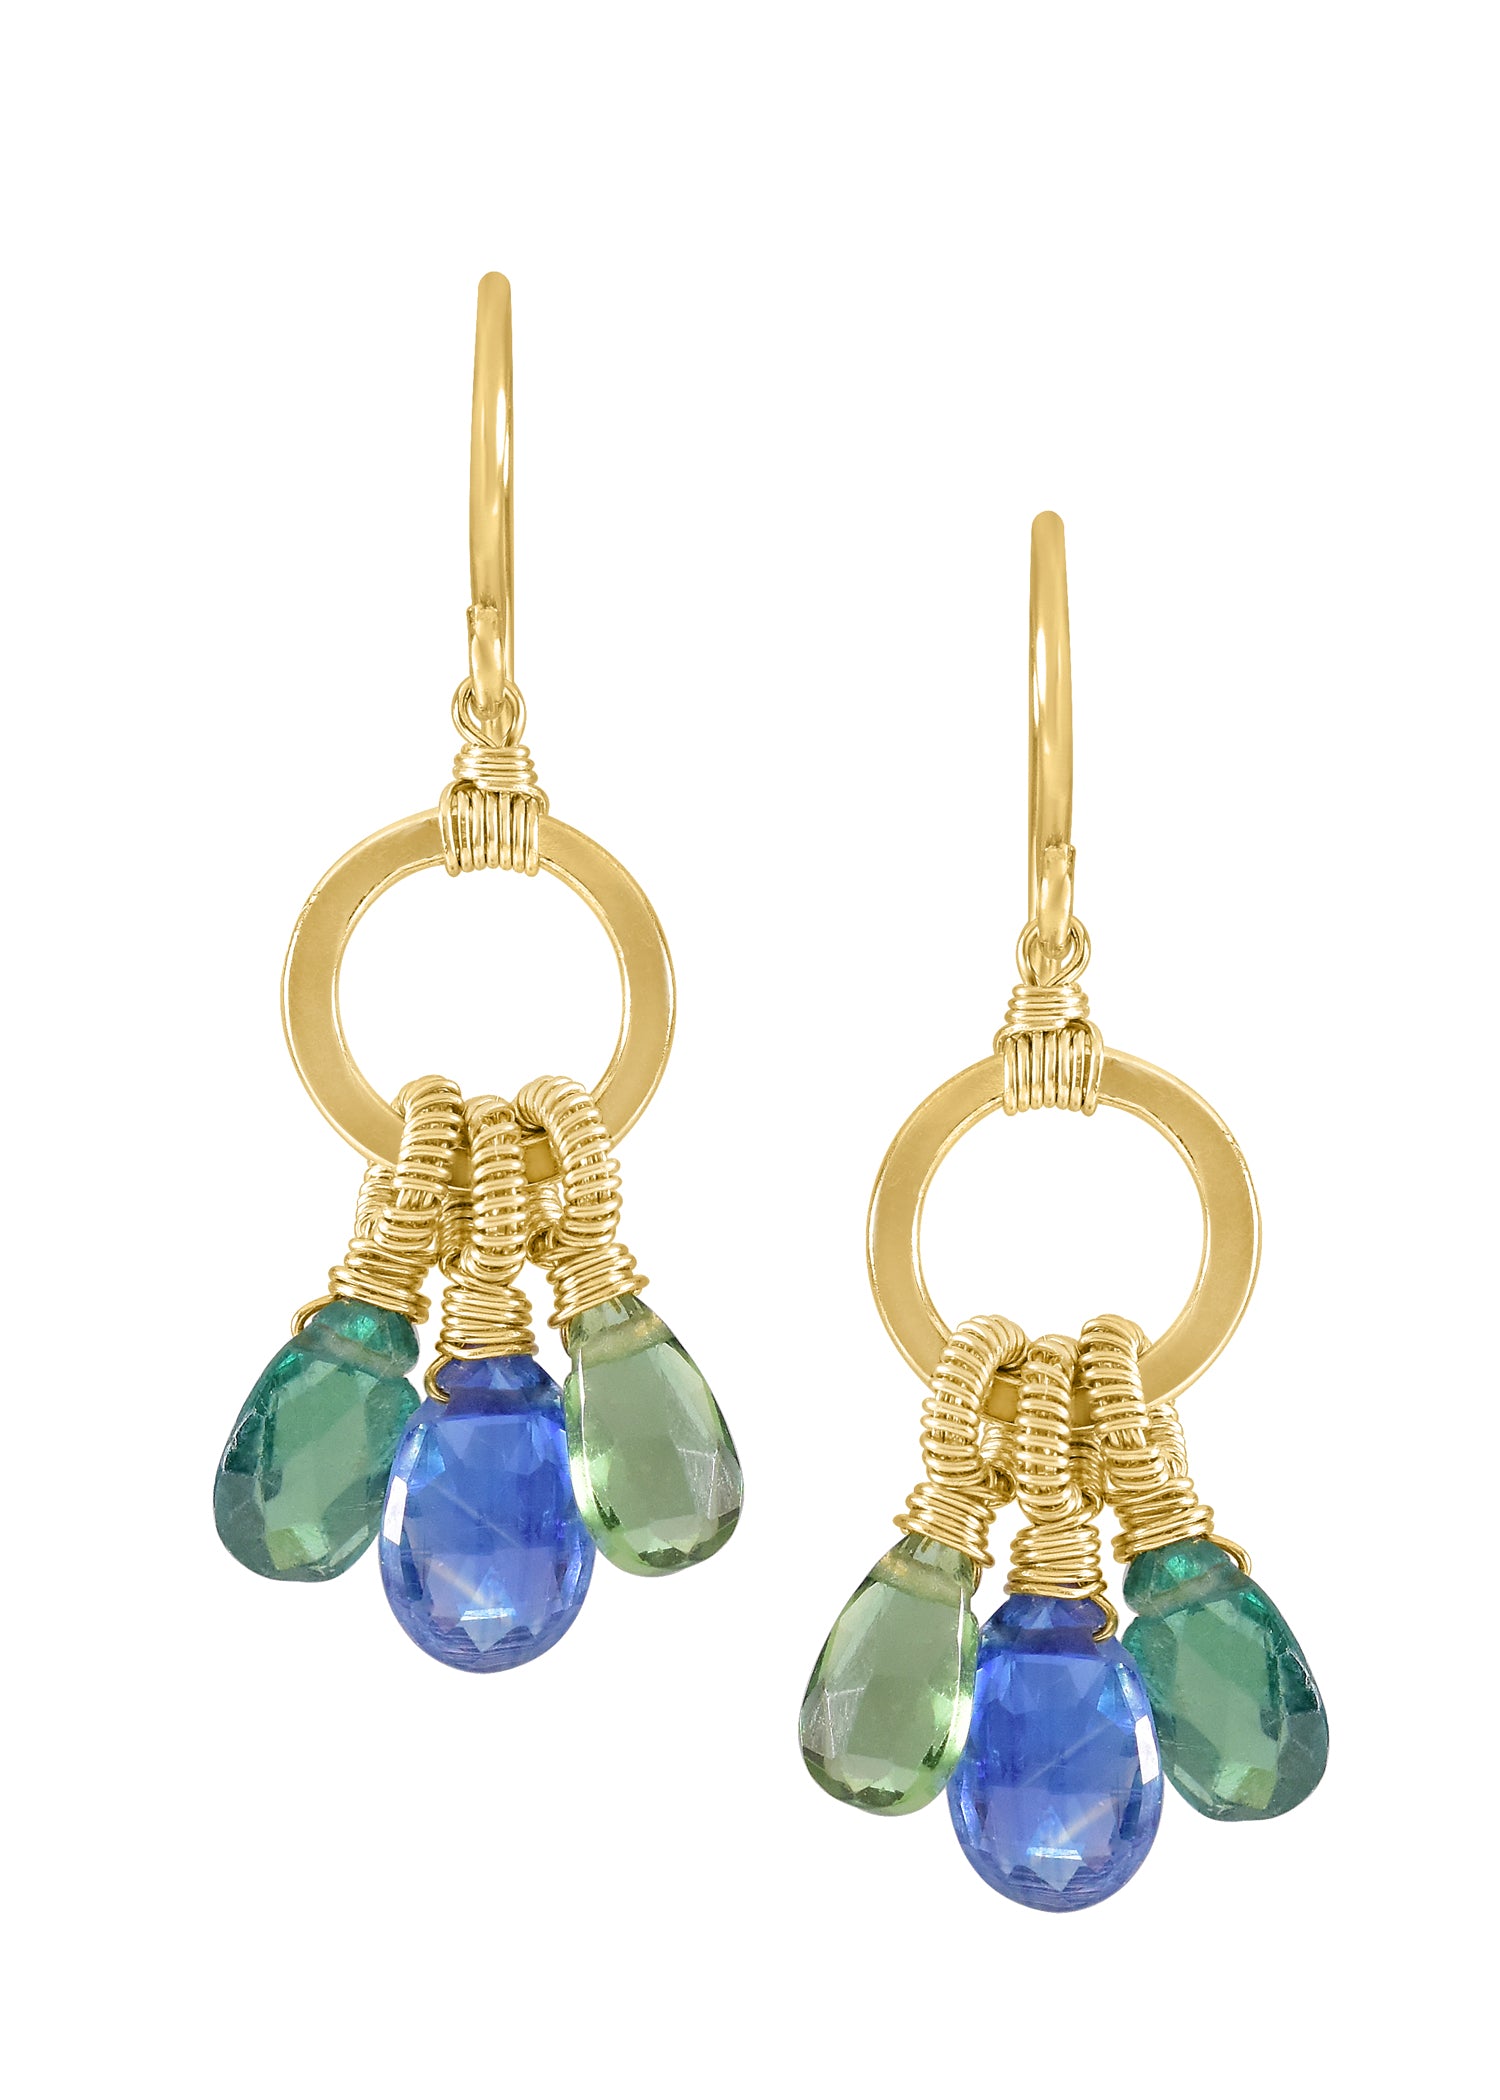 Kyanite Apatite 14k gold fill Earrings measure 1-1/8" in length (including the ear wires) and 5/8" in width at the widest point Handmade in our Los Angeles studio